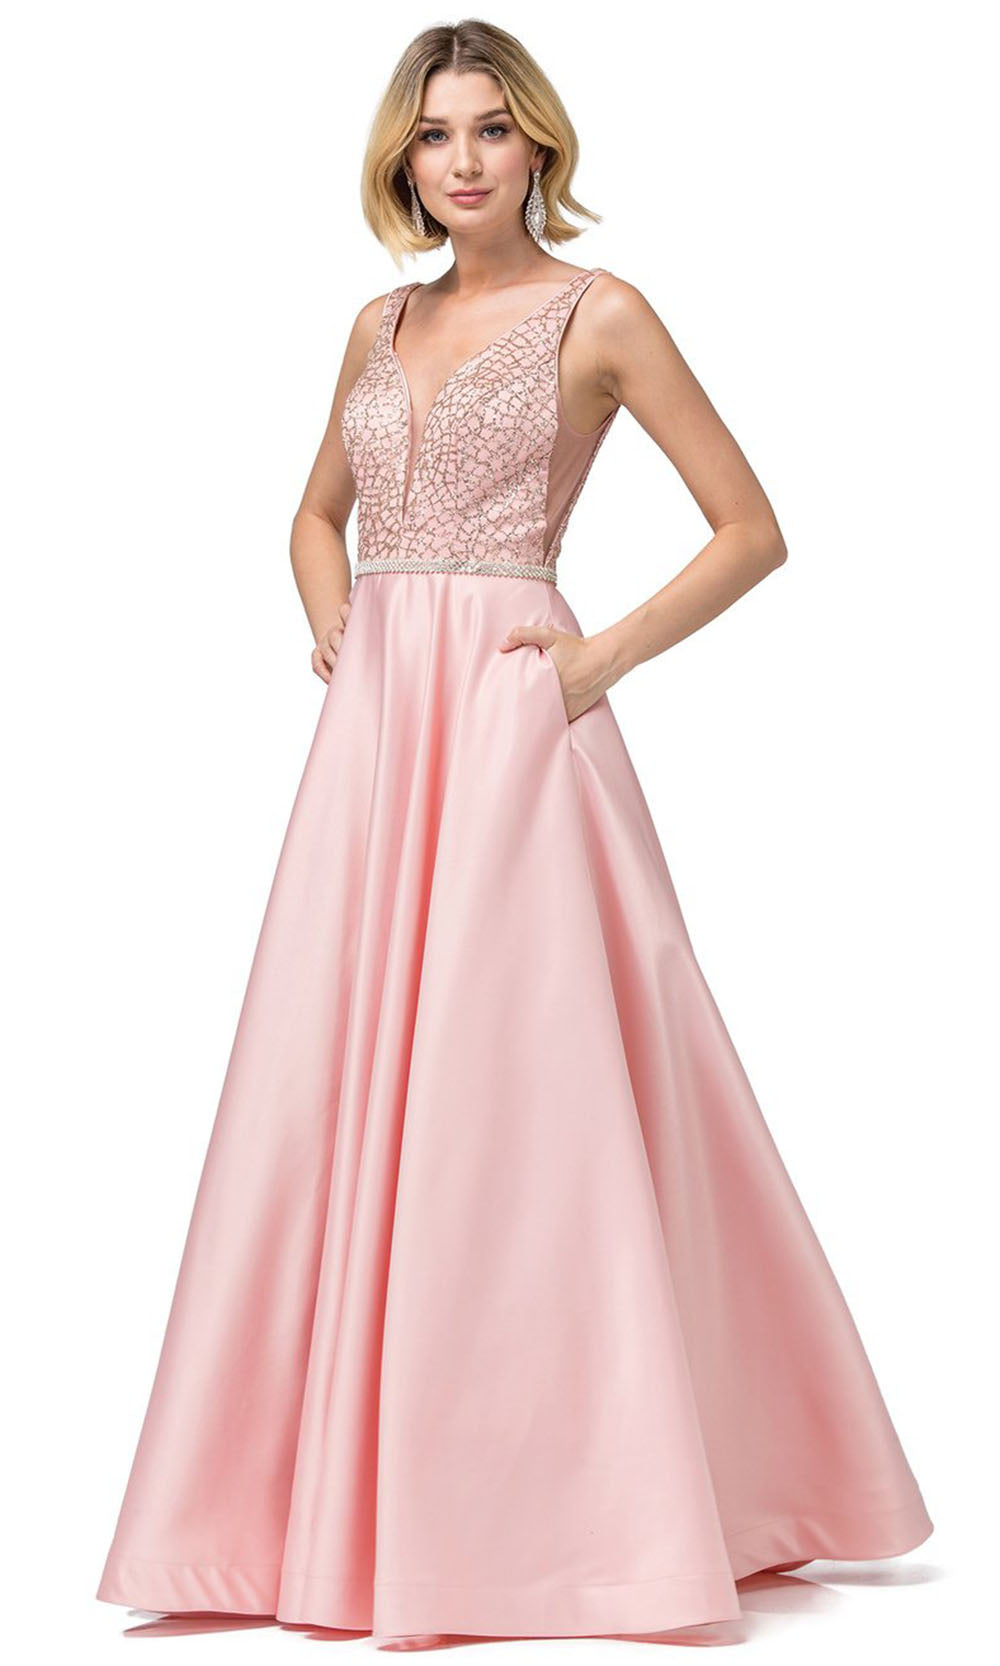 Dancing Queen - 2805 Glittery Bodice Linen A-Line Gown In Pink